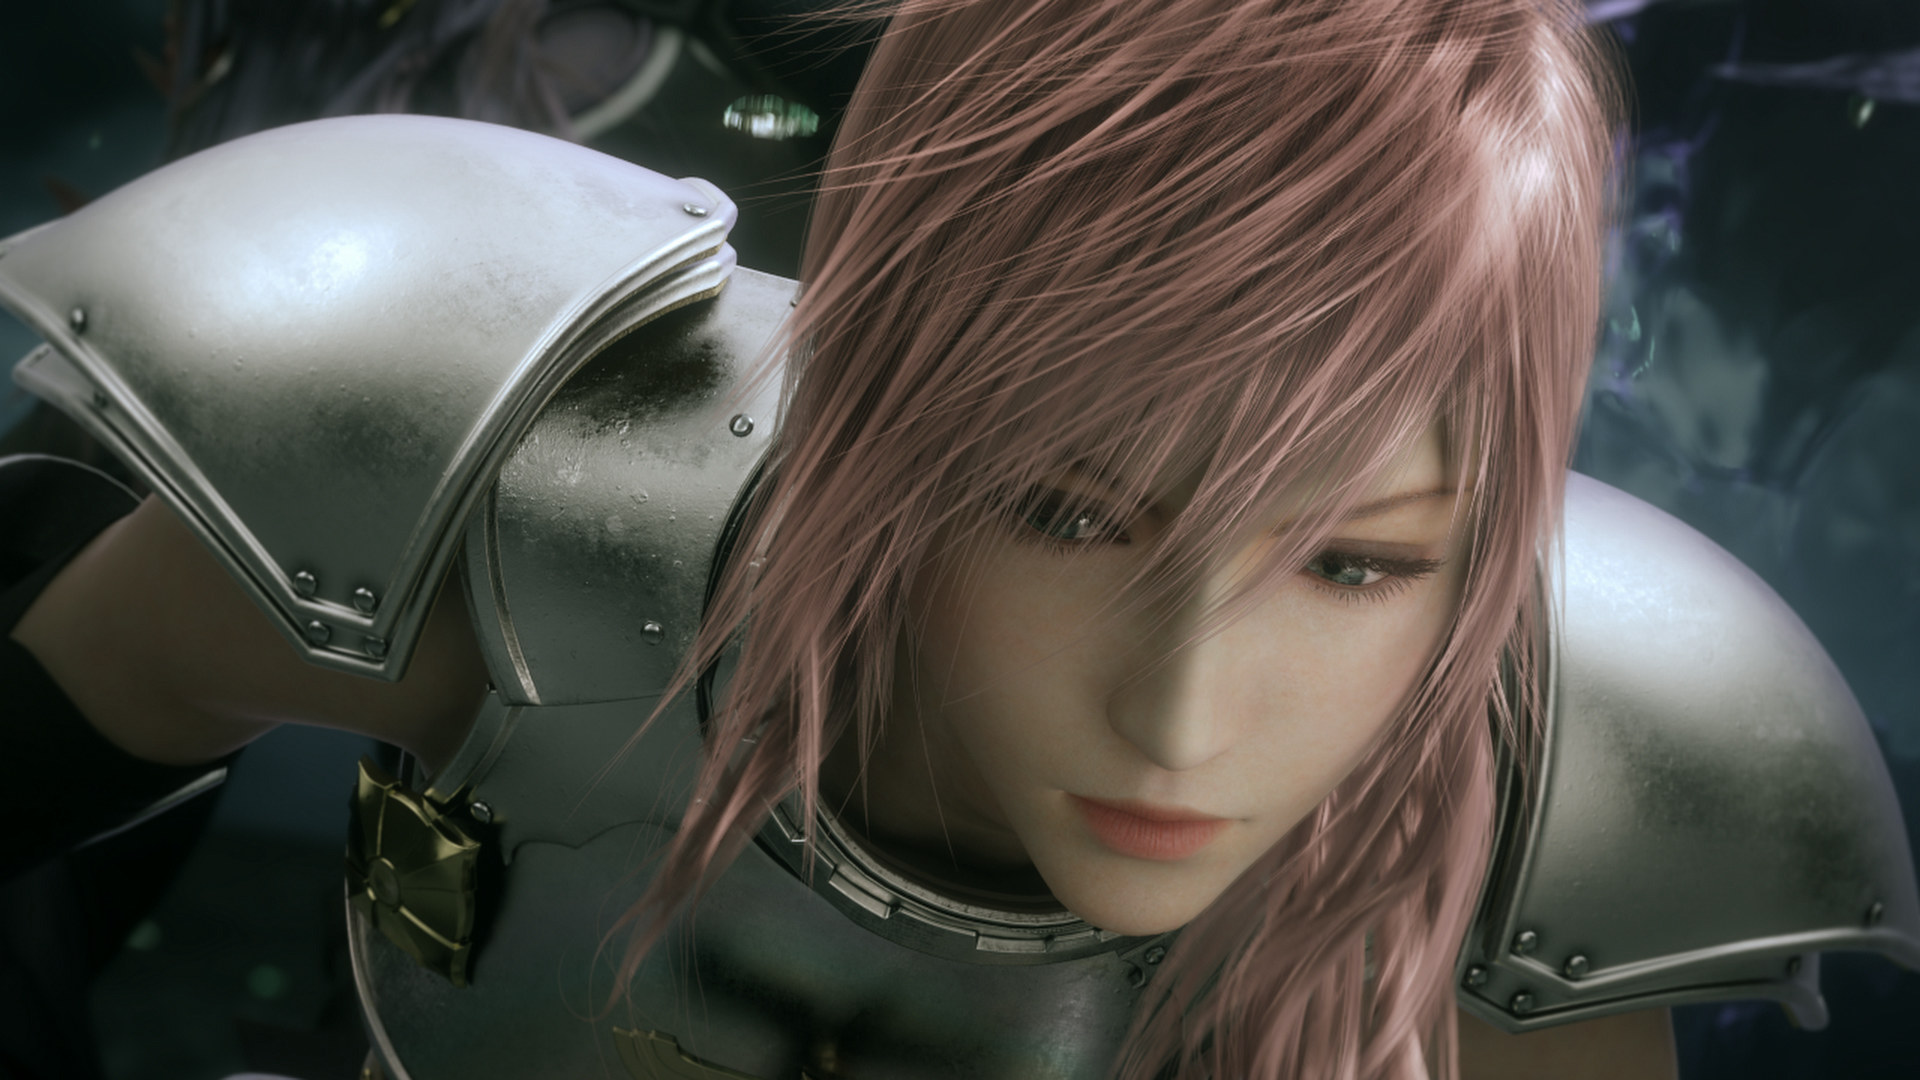 Final Fantasy Xiii 2 Wallpaper 009 Lightning Wallpapers Ethereal Games